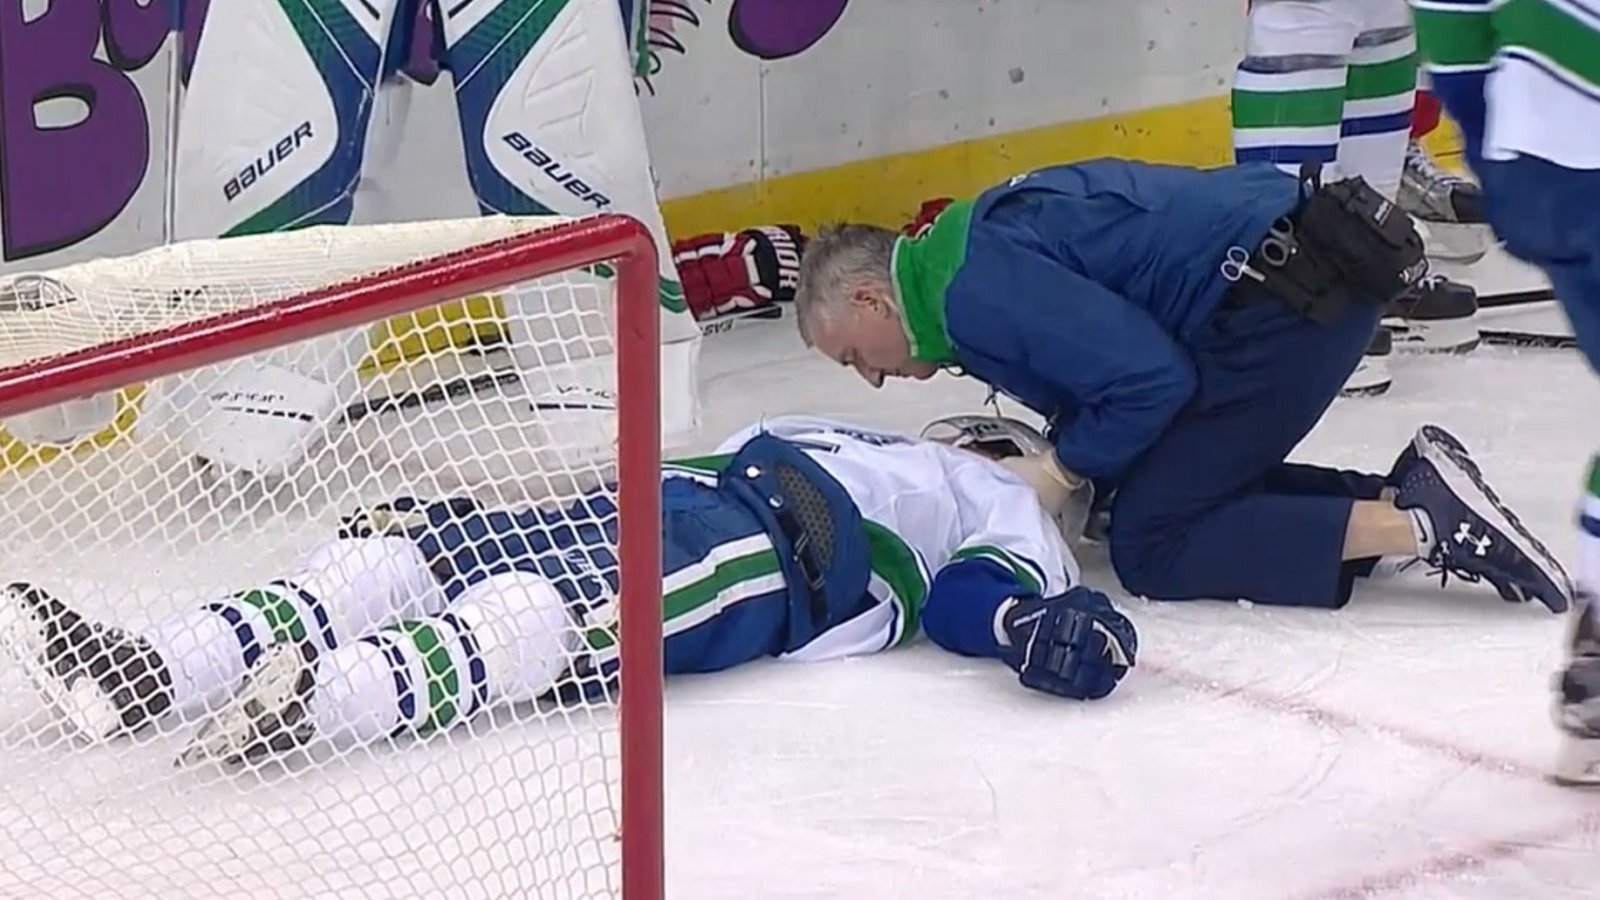 Bad blood continues between Canucks &amp; Devils after knock out hit last season.